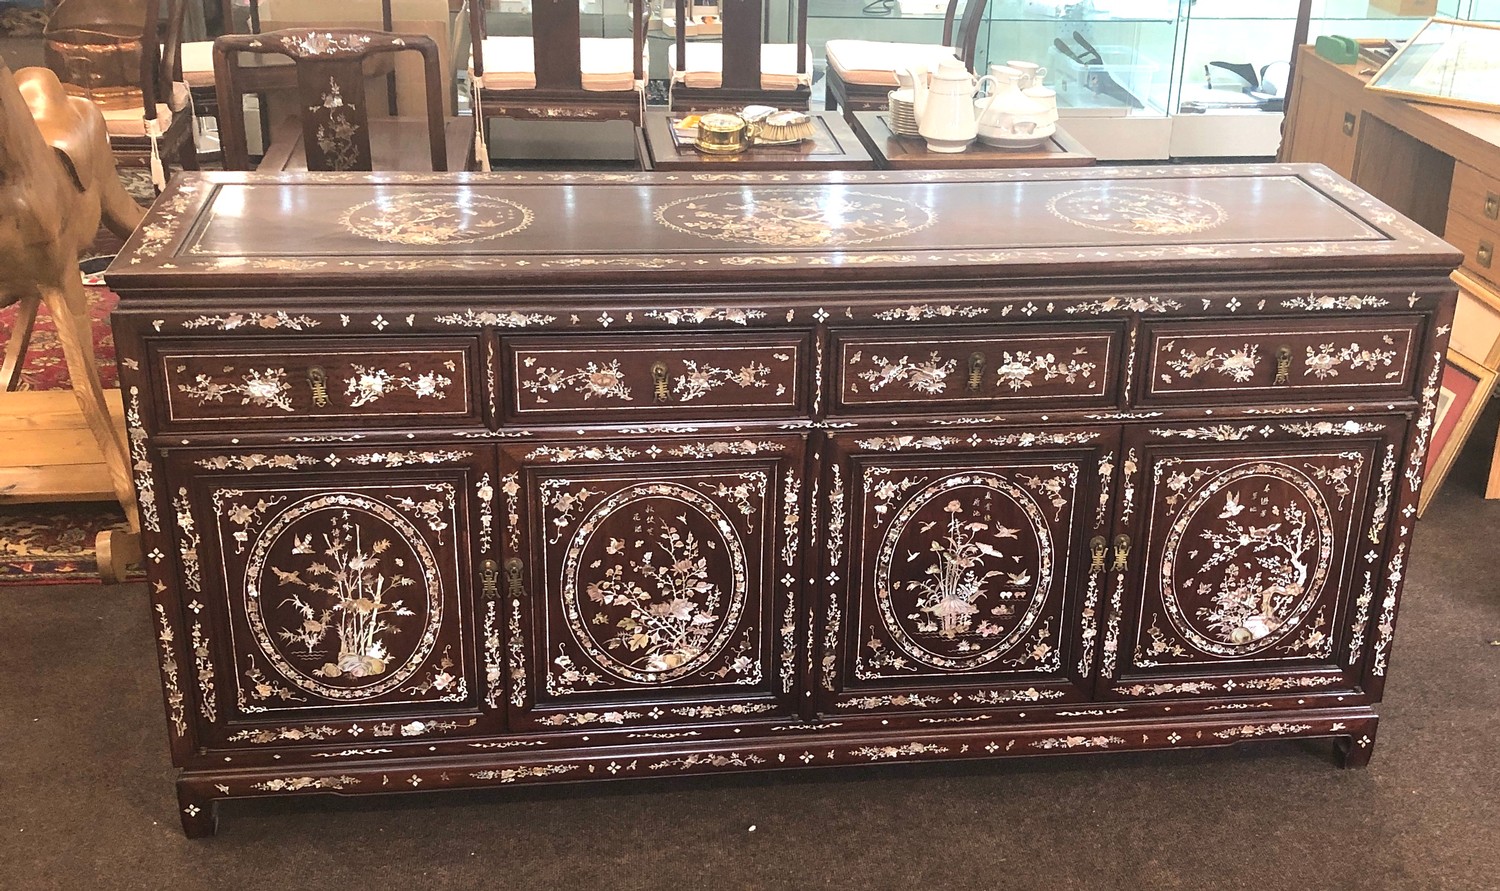 Large fine quality Chinese or Oriental Mother Of Pearl sideboard server some pieces of mop are